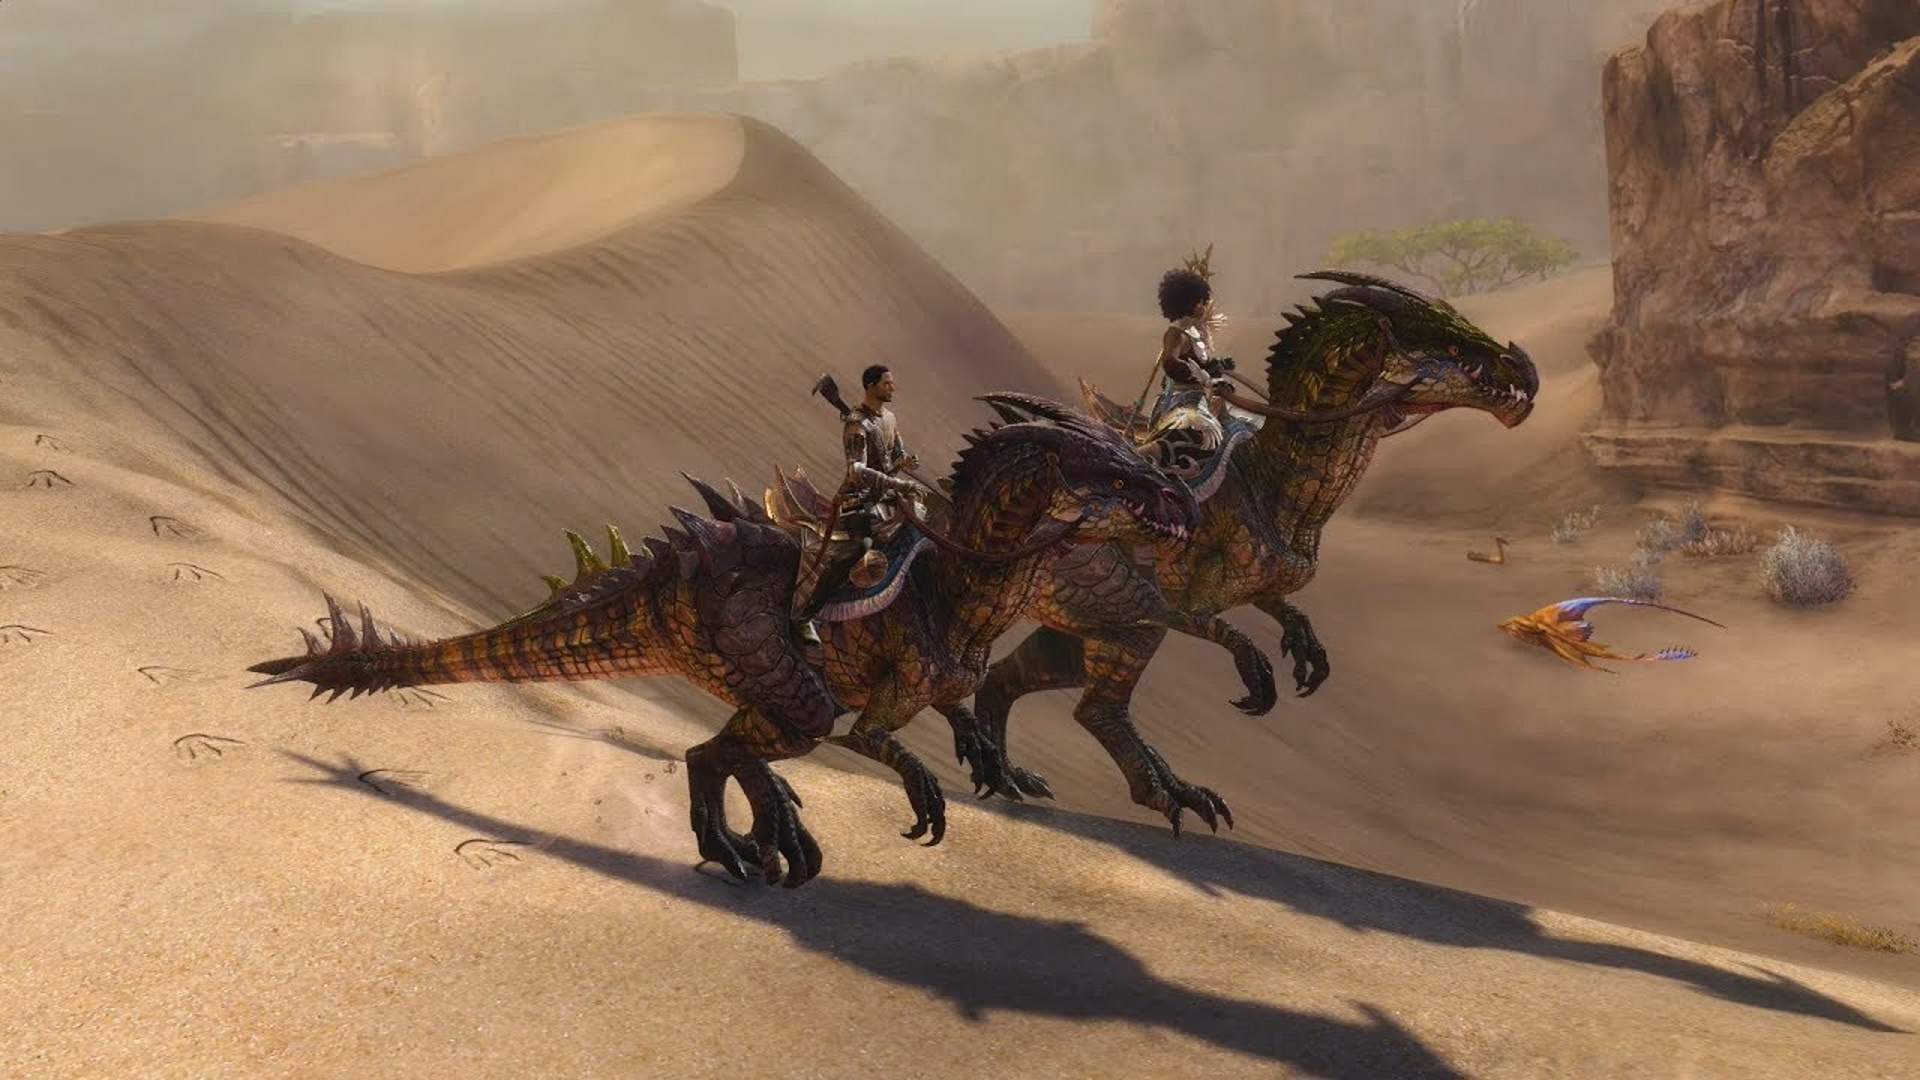 Guild Wars 2 mount skins are free for the next few weeks